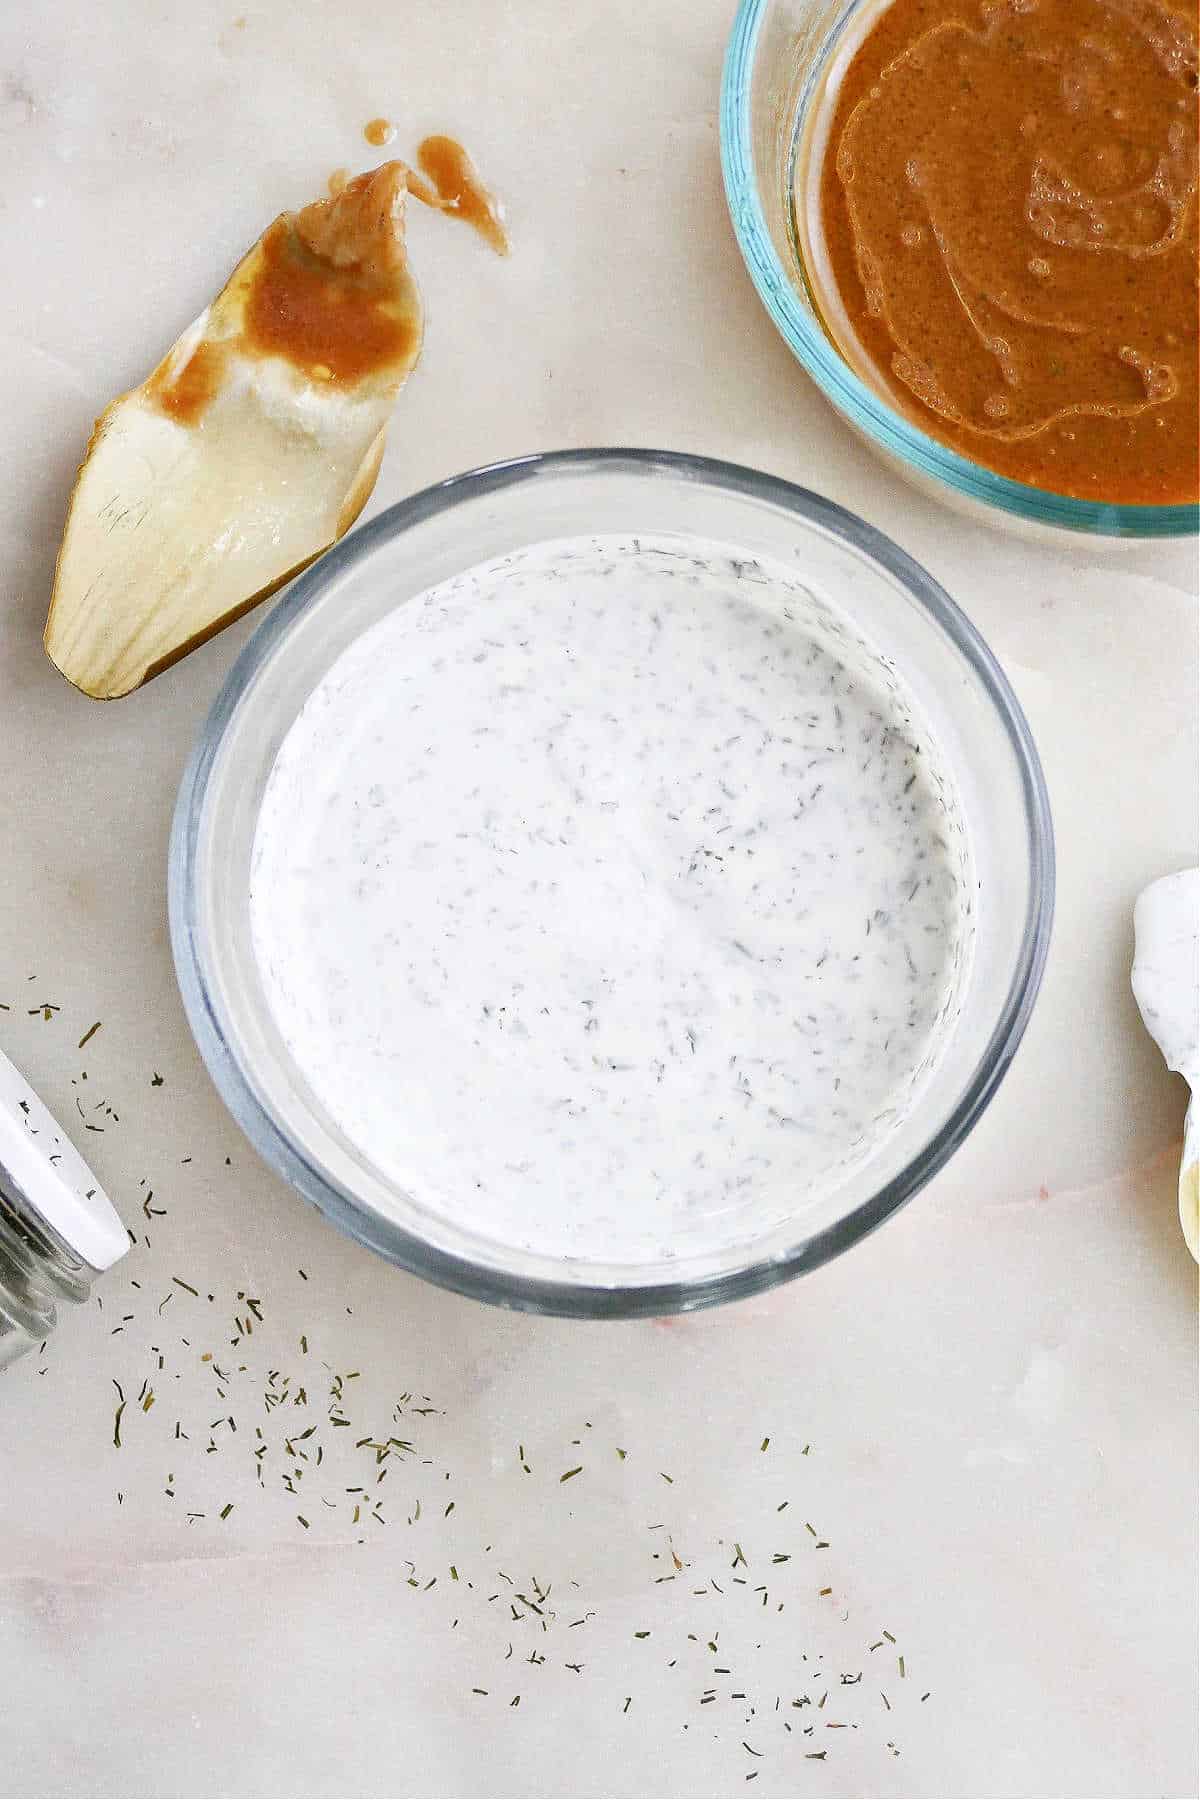 dill yogurt artichoke dipping sauce in a glass container on a counter